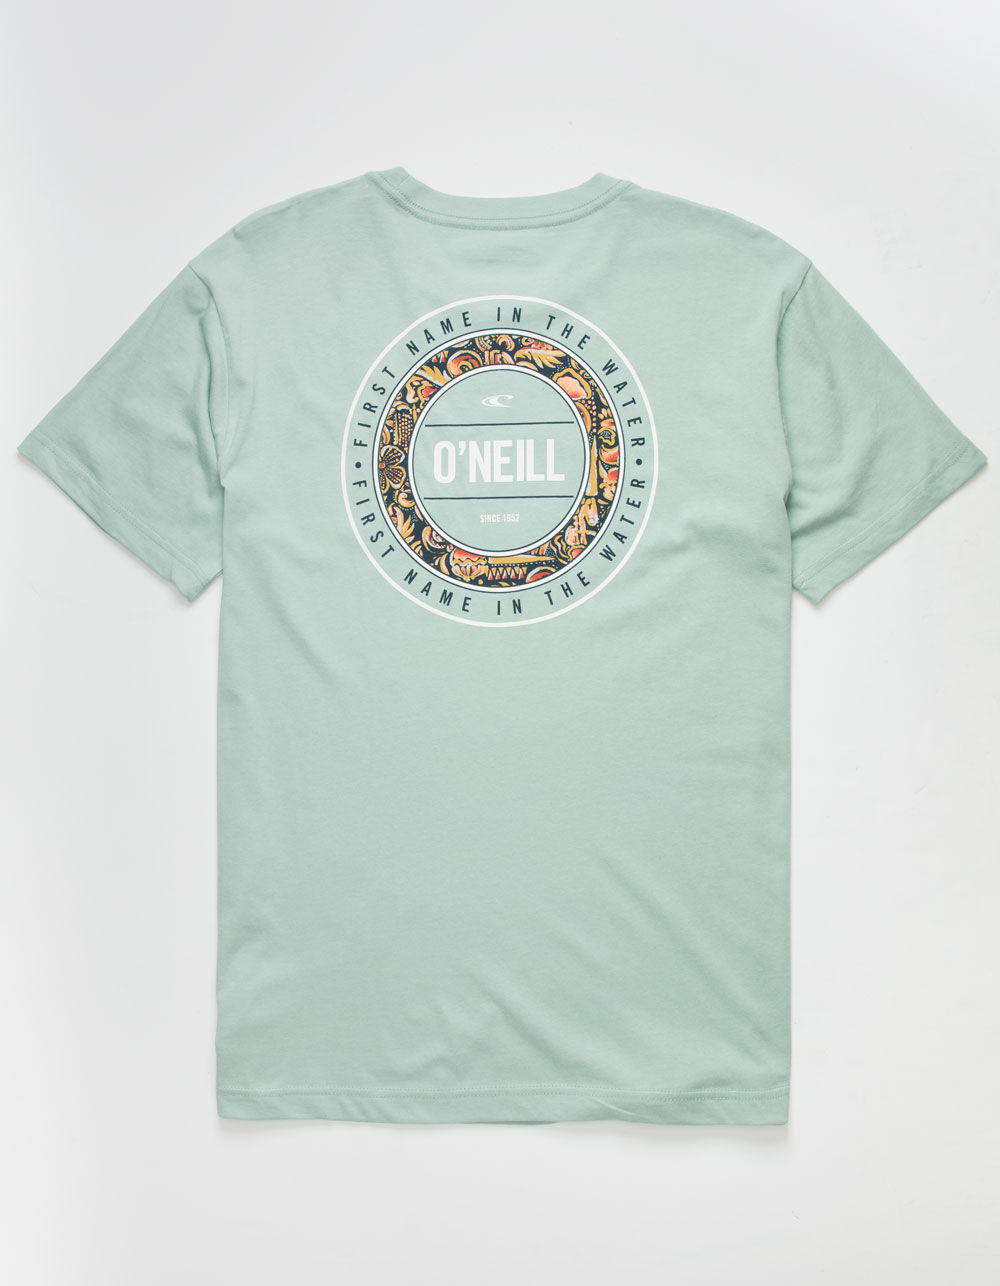 O'NEILL Balinese Mens T-Shirt image number 0